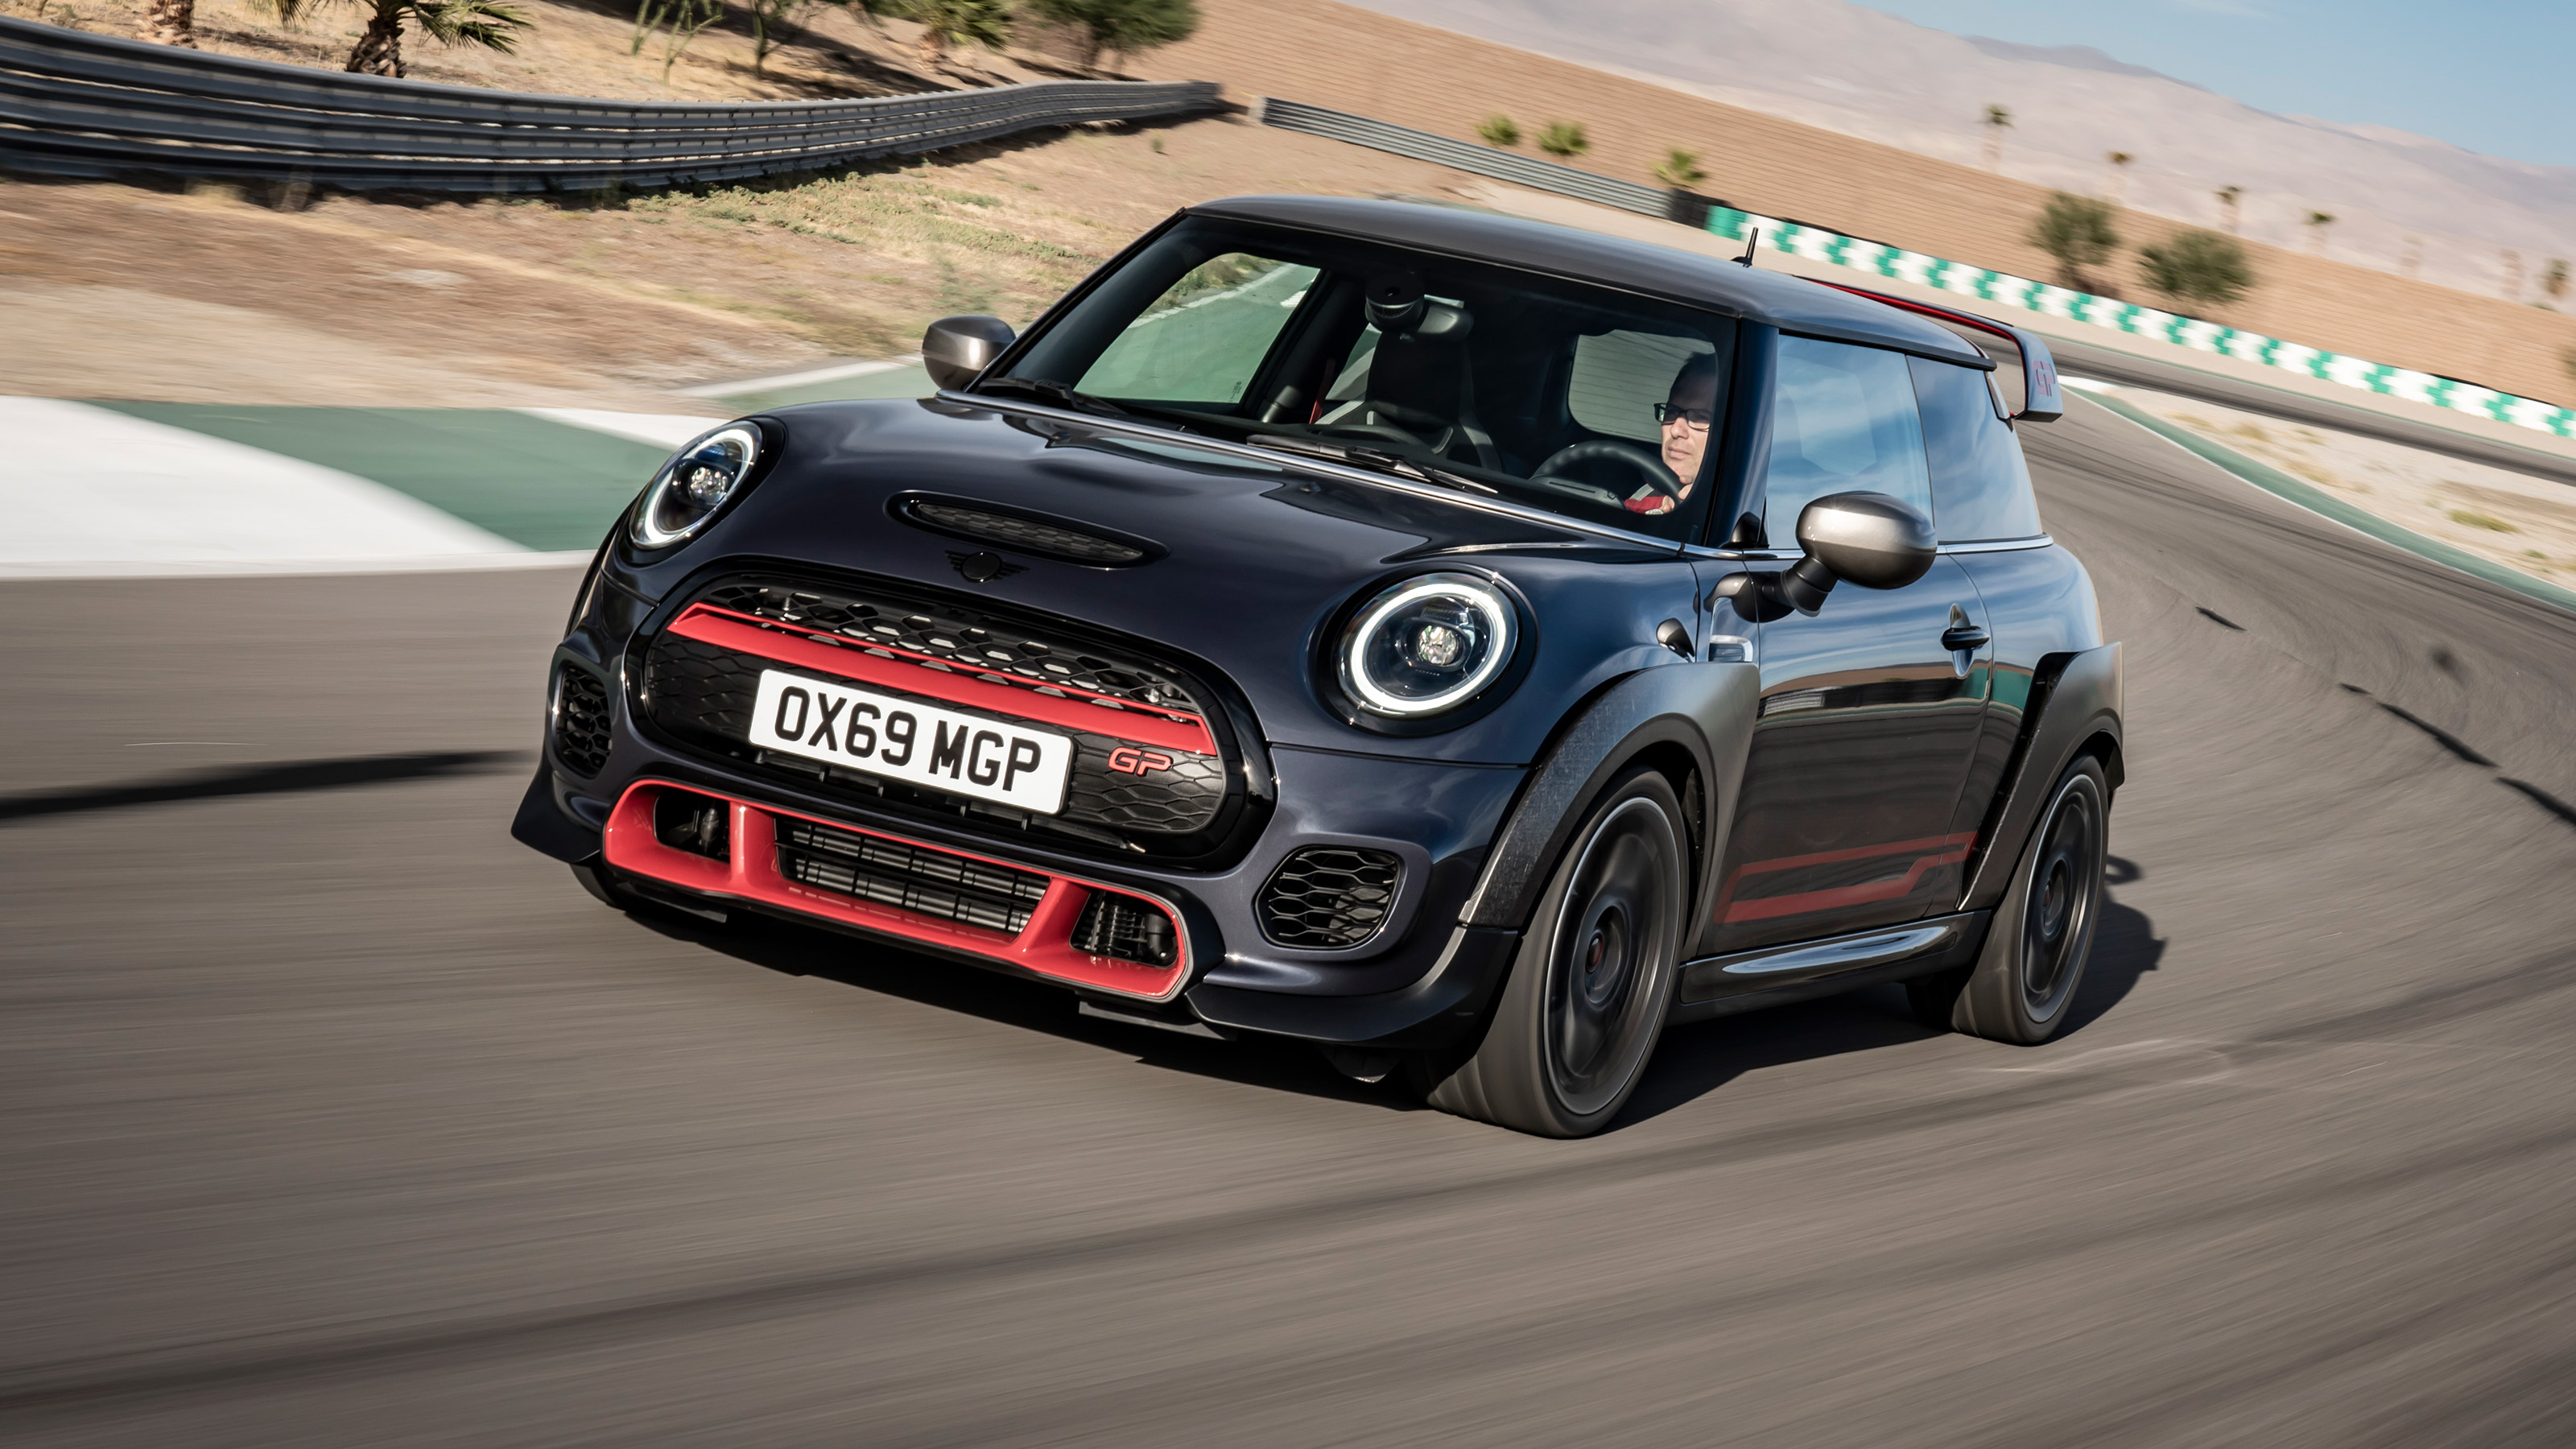 2020 Mini Jcw Gp Revealed 302bhp And Bespoke Styling For